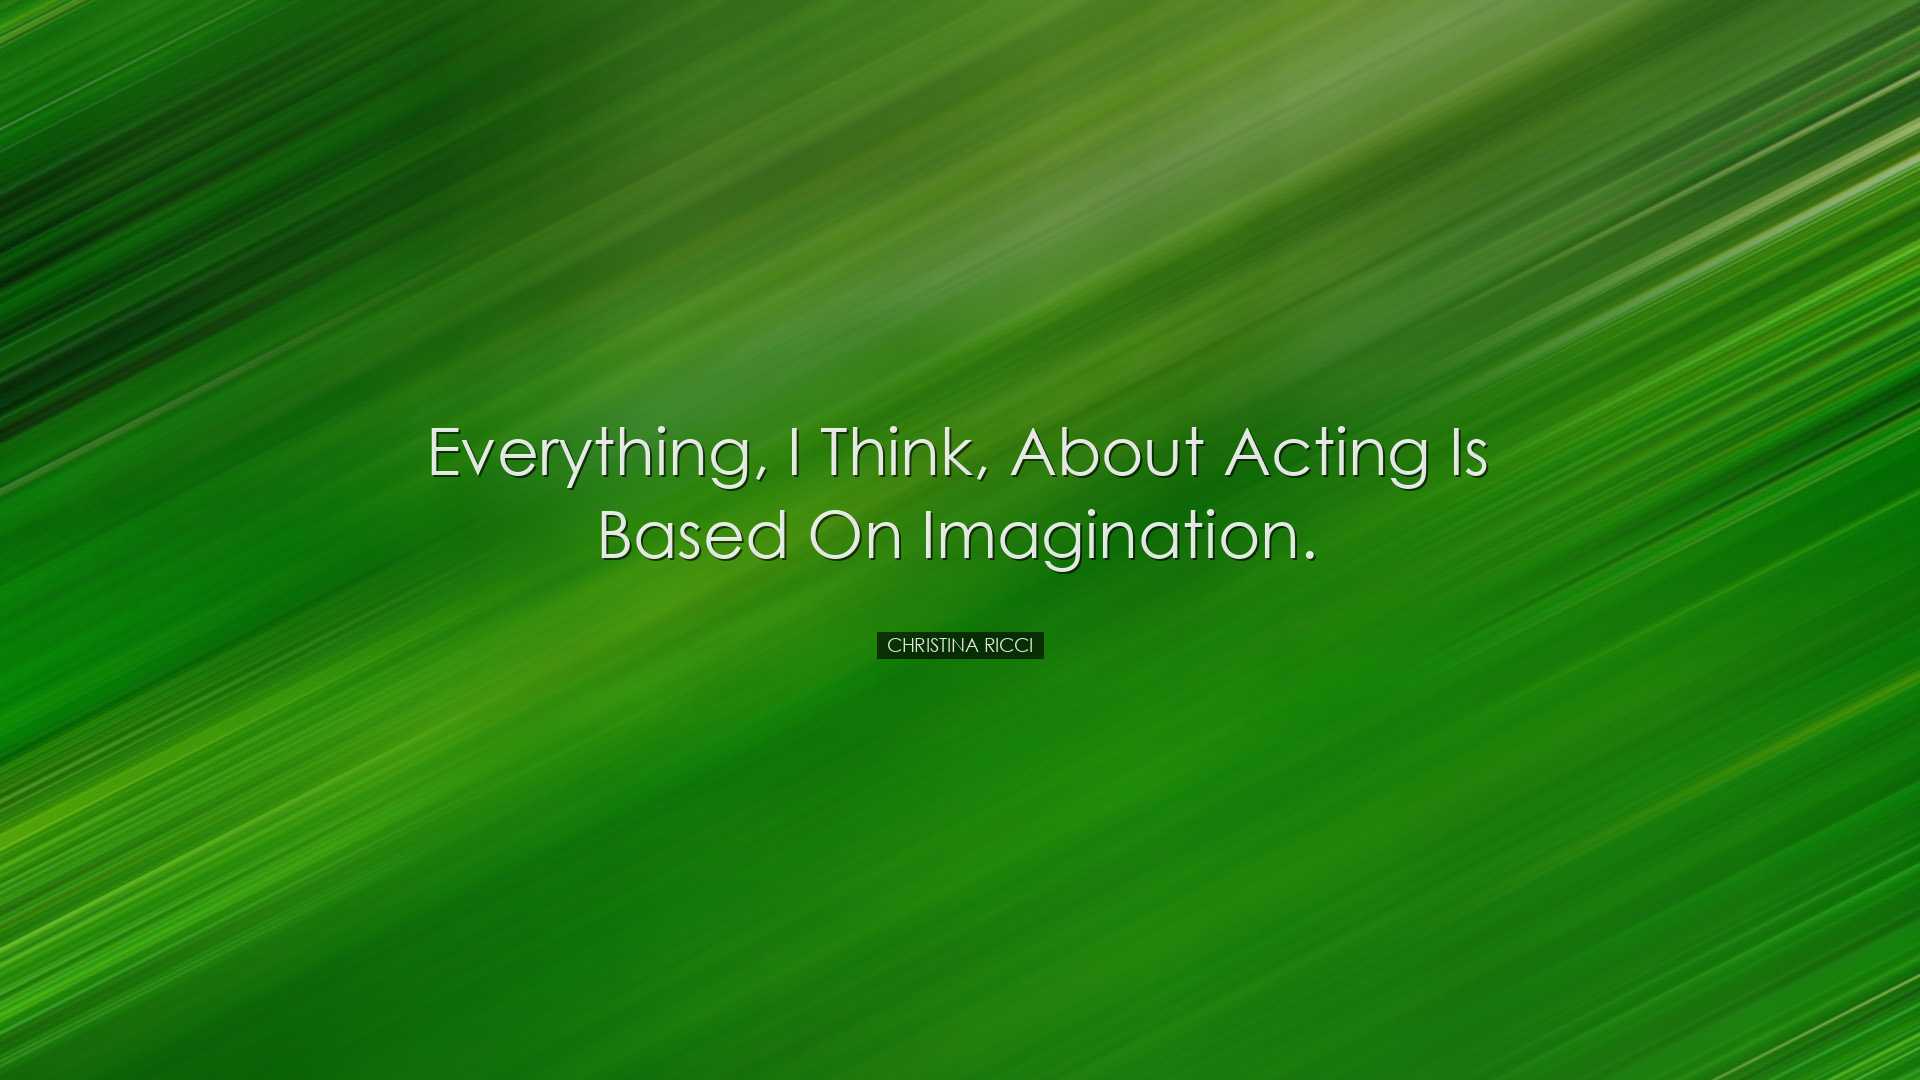 Everything, I think, about acting is based on imagination. - Chris